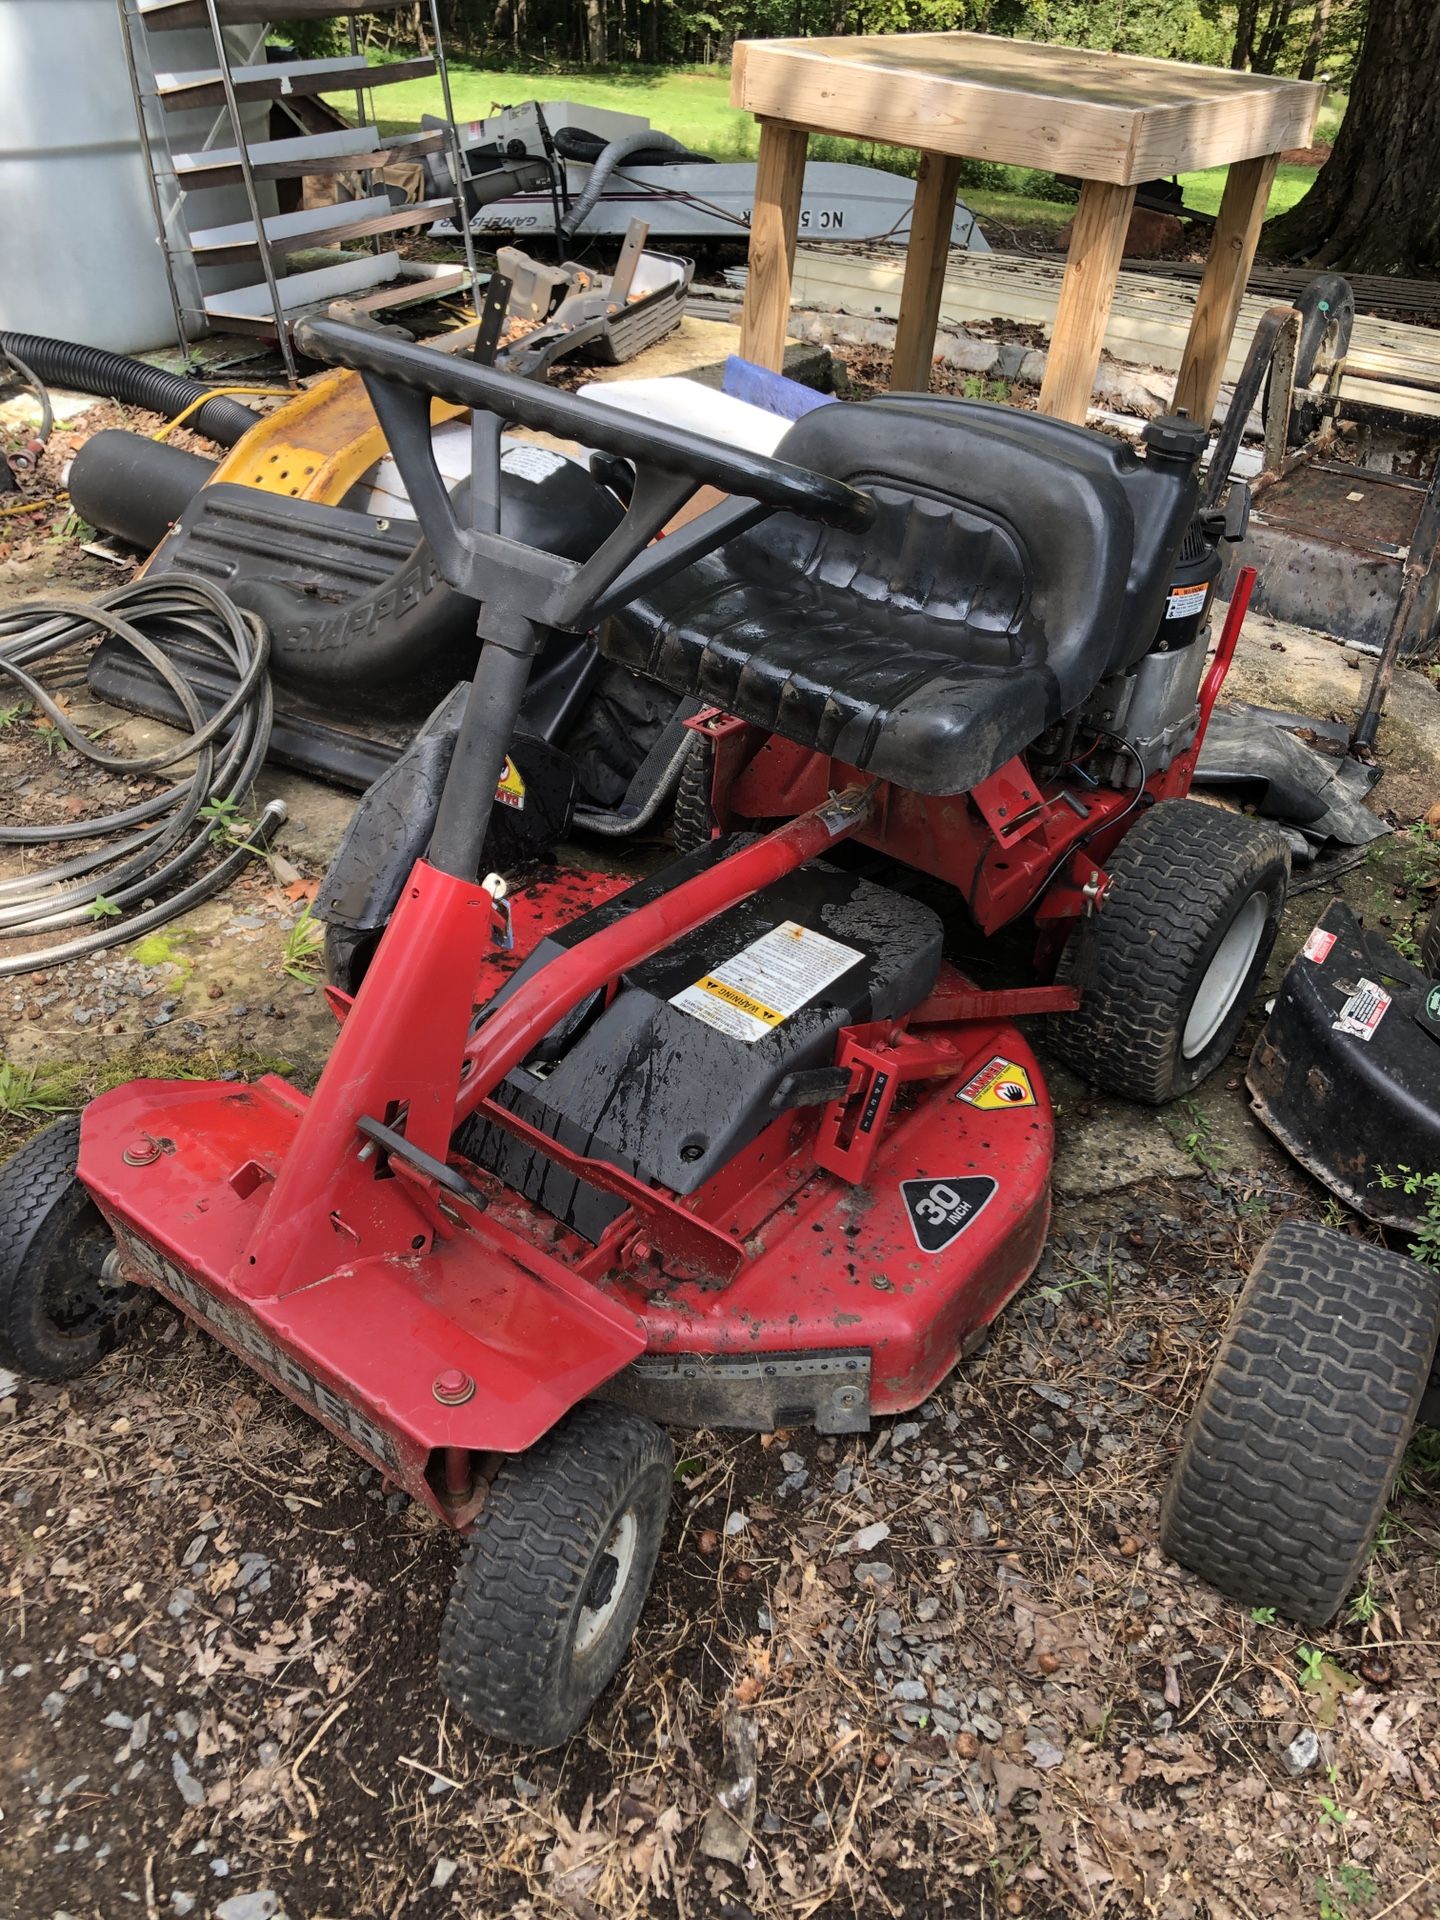 30 inch Snapper riding mower with bagger